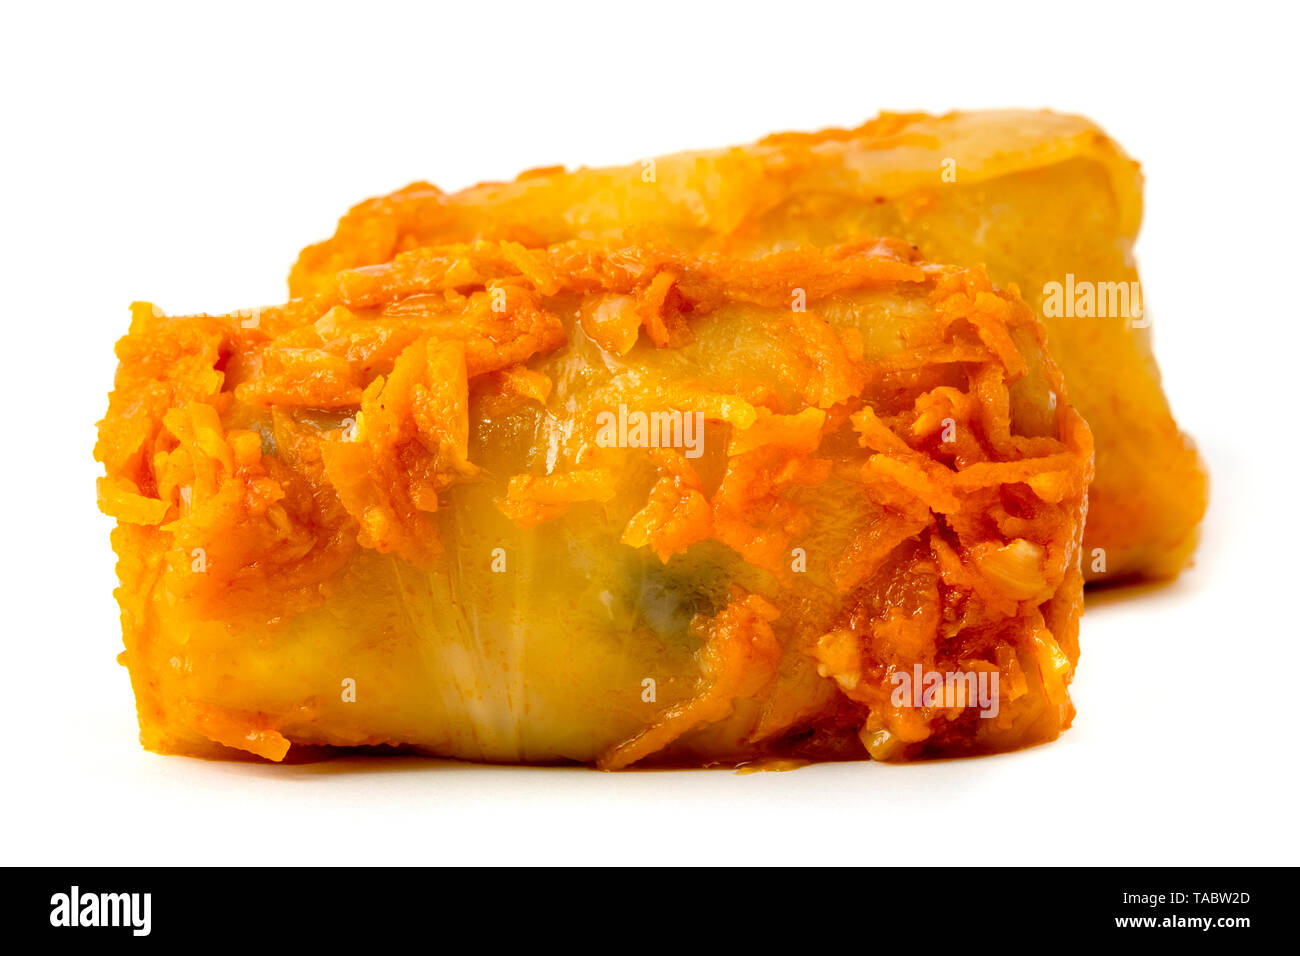 Stuffed cabbage rolls with tomato sauce and carrots an on a white background Stock Photo